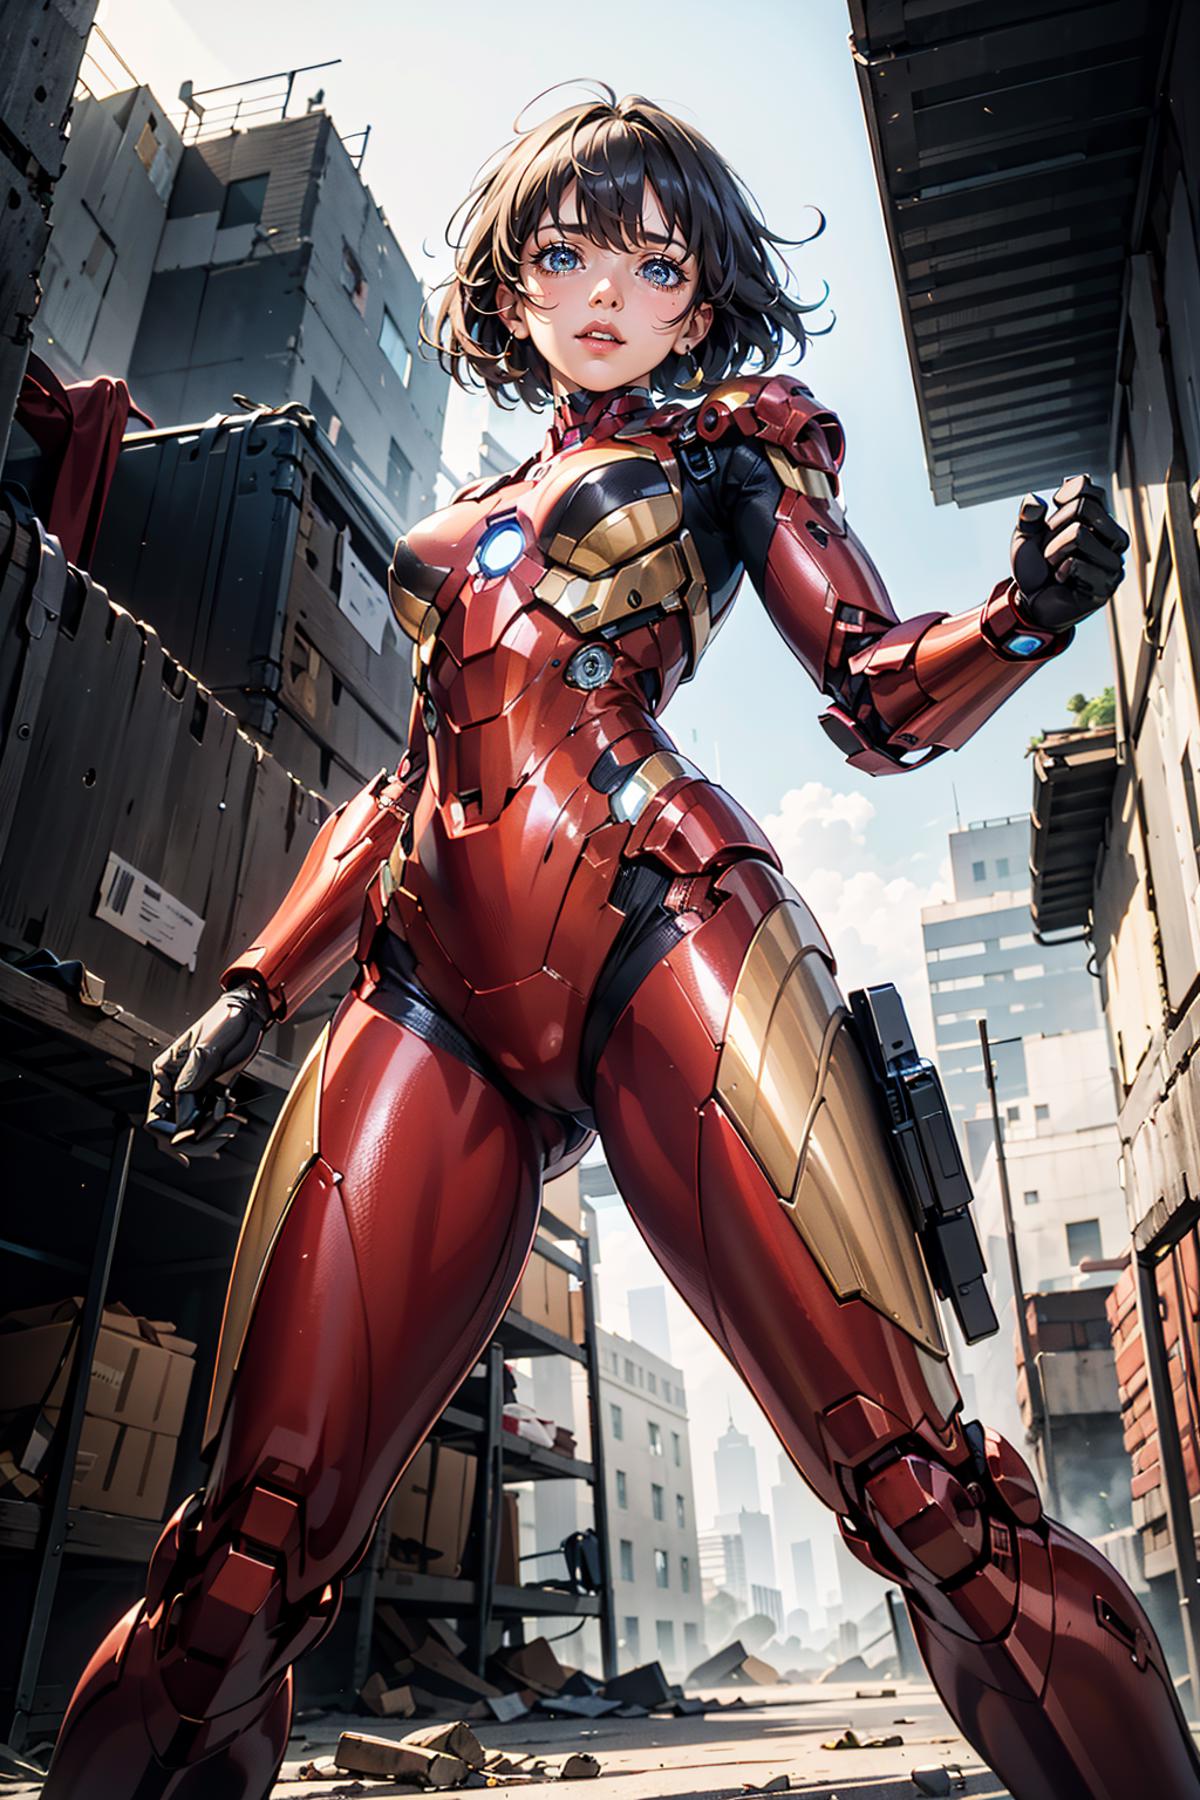 A digital art illustration of a woman in a red Iron Man-like suit with a gun in her hand.